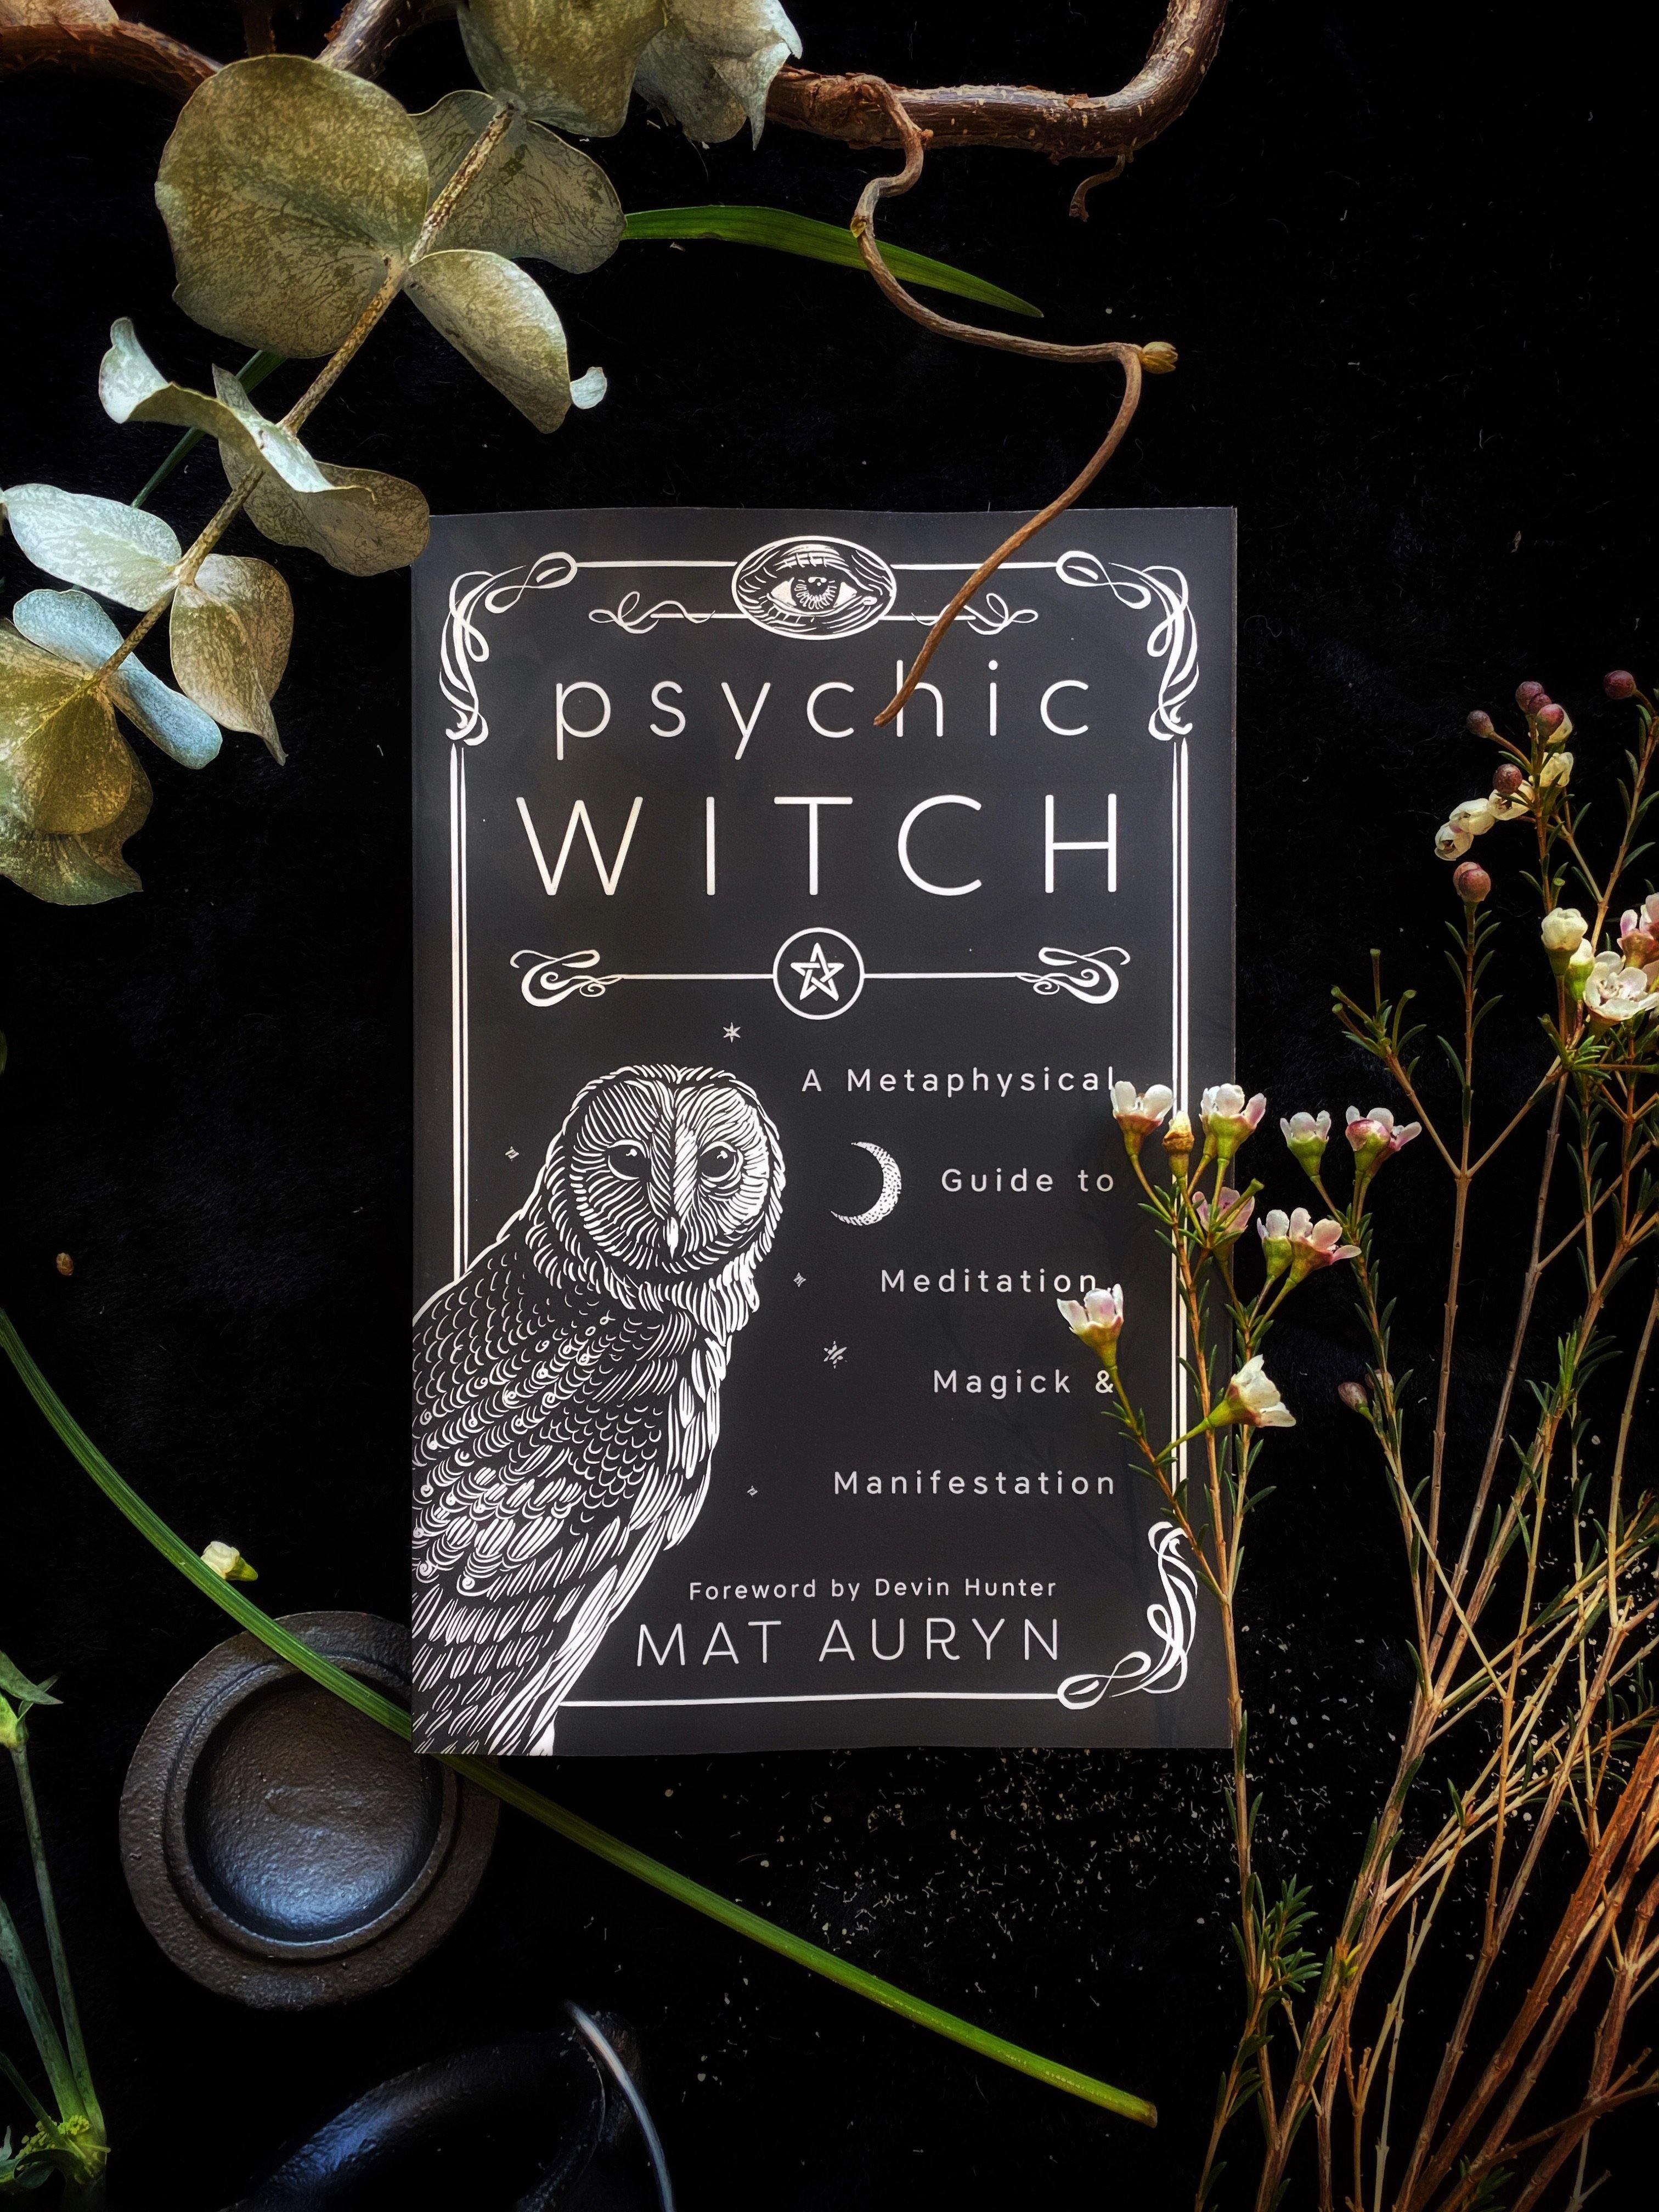 Psychic Witch: A Metaphysical Guide to Meditation, Magick & Manifestation - Keven Craft Rituals